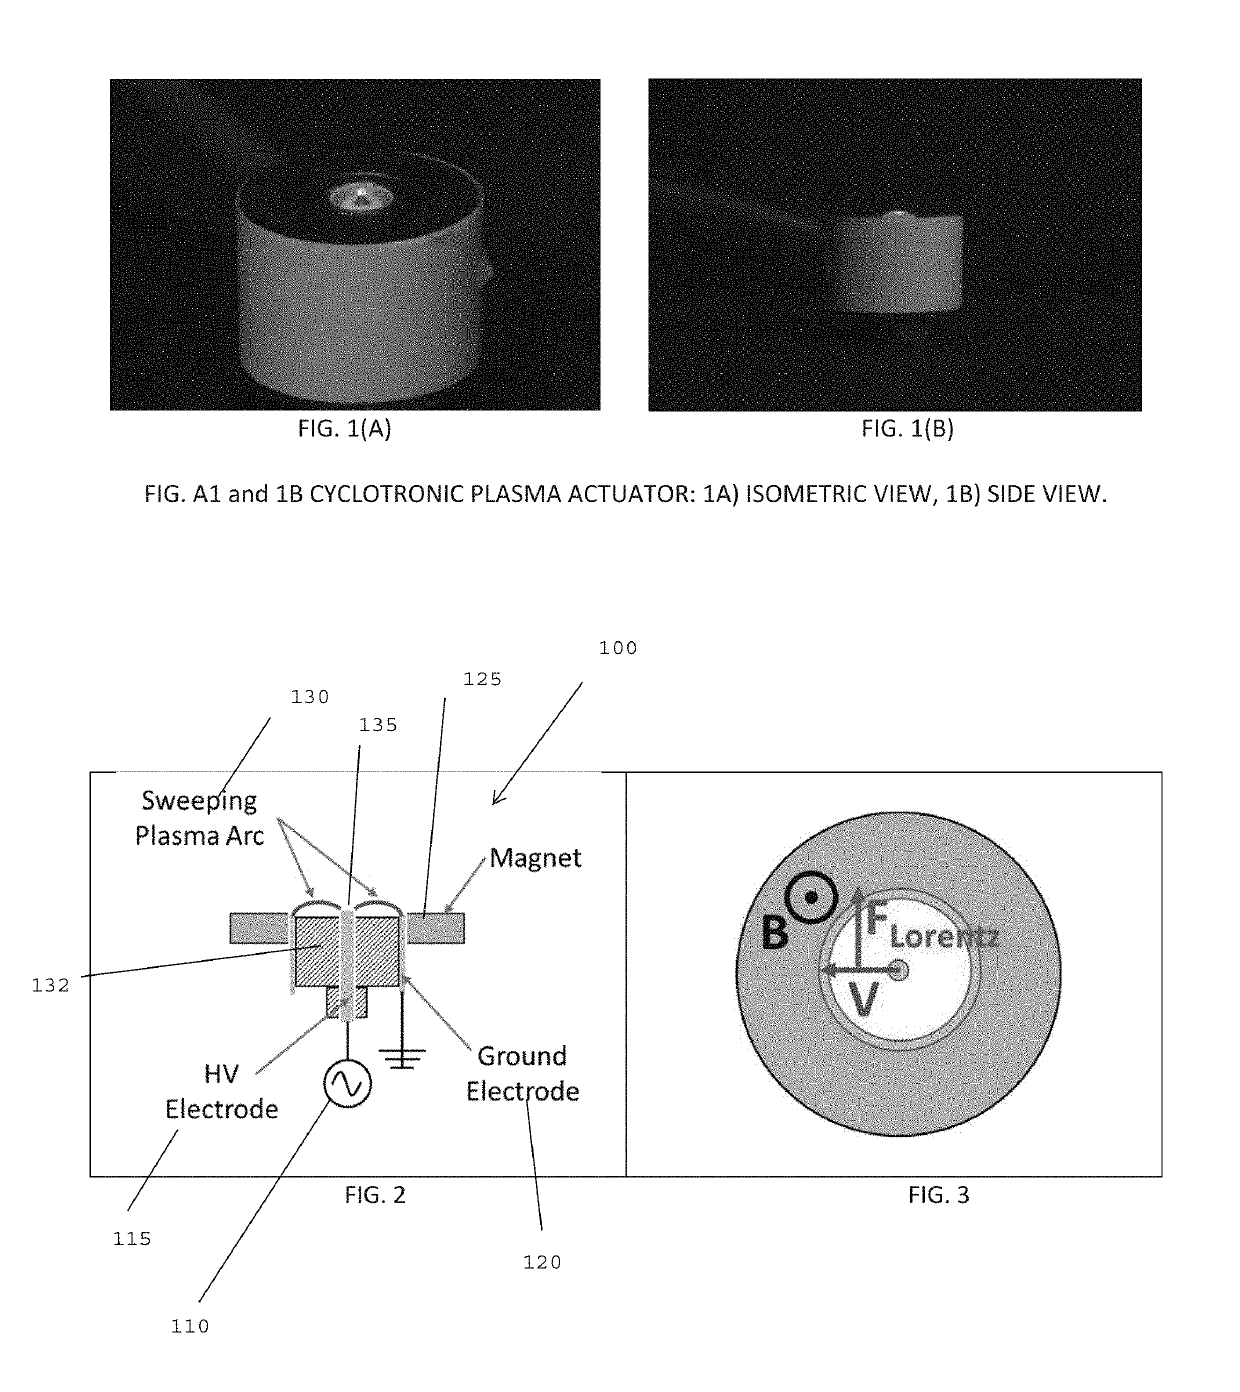 Cyclotronic plasma actuator with arc-magnet for active flow control